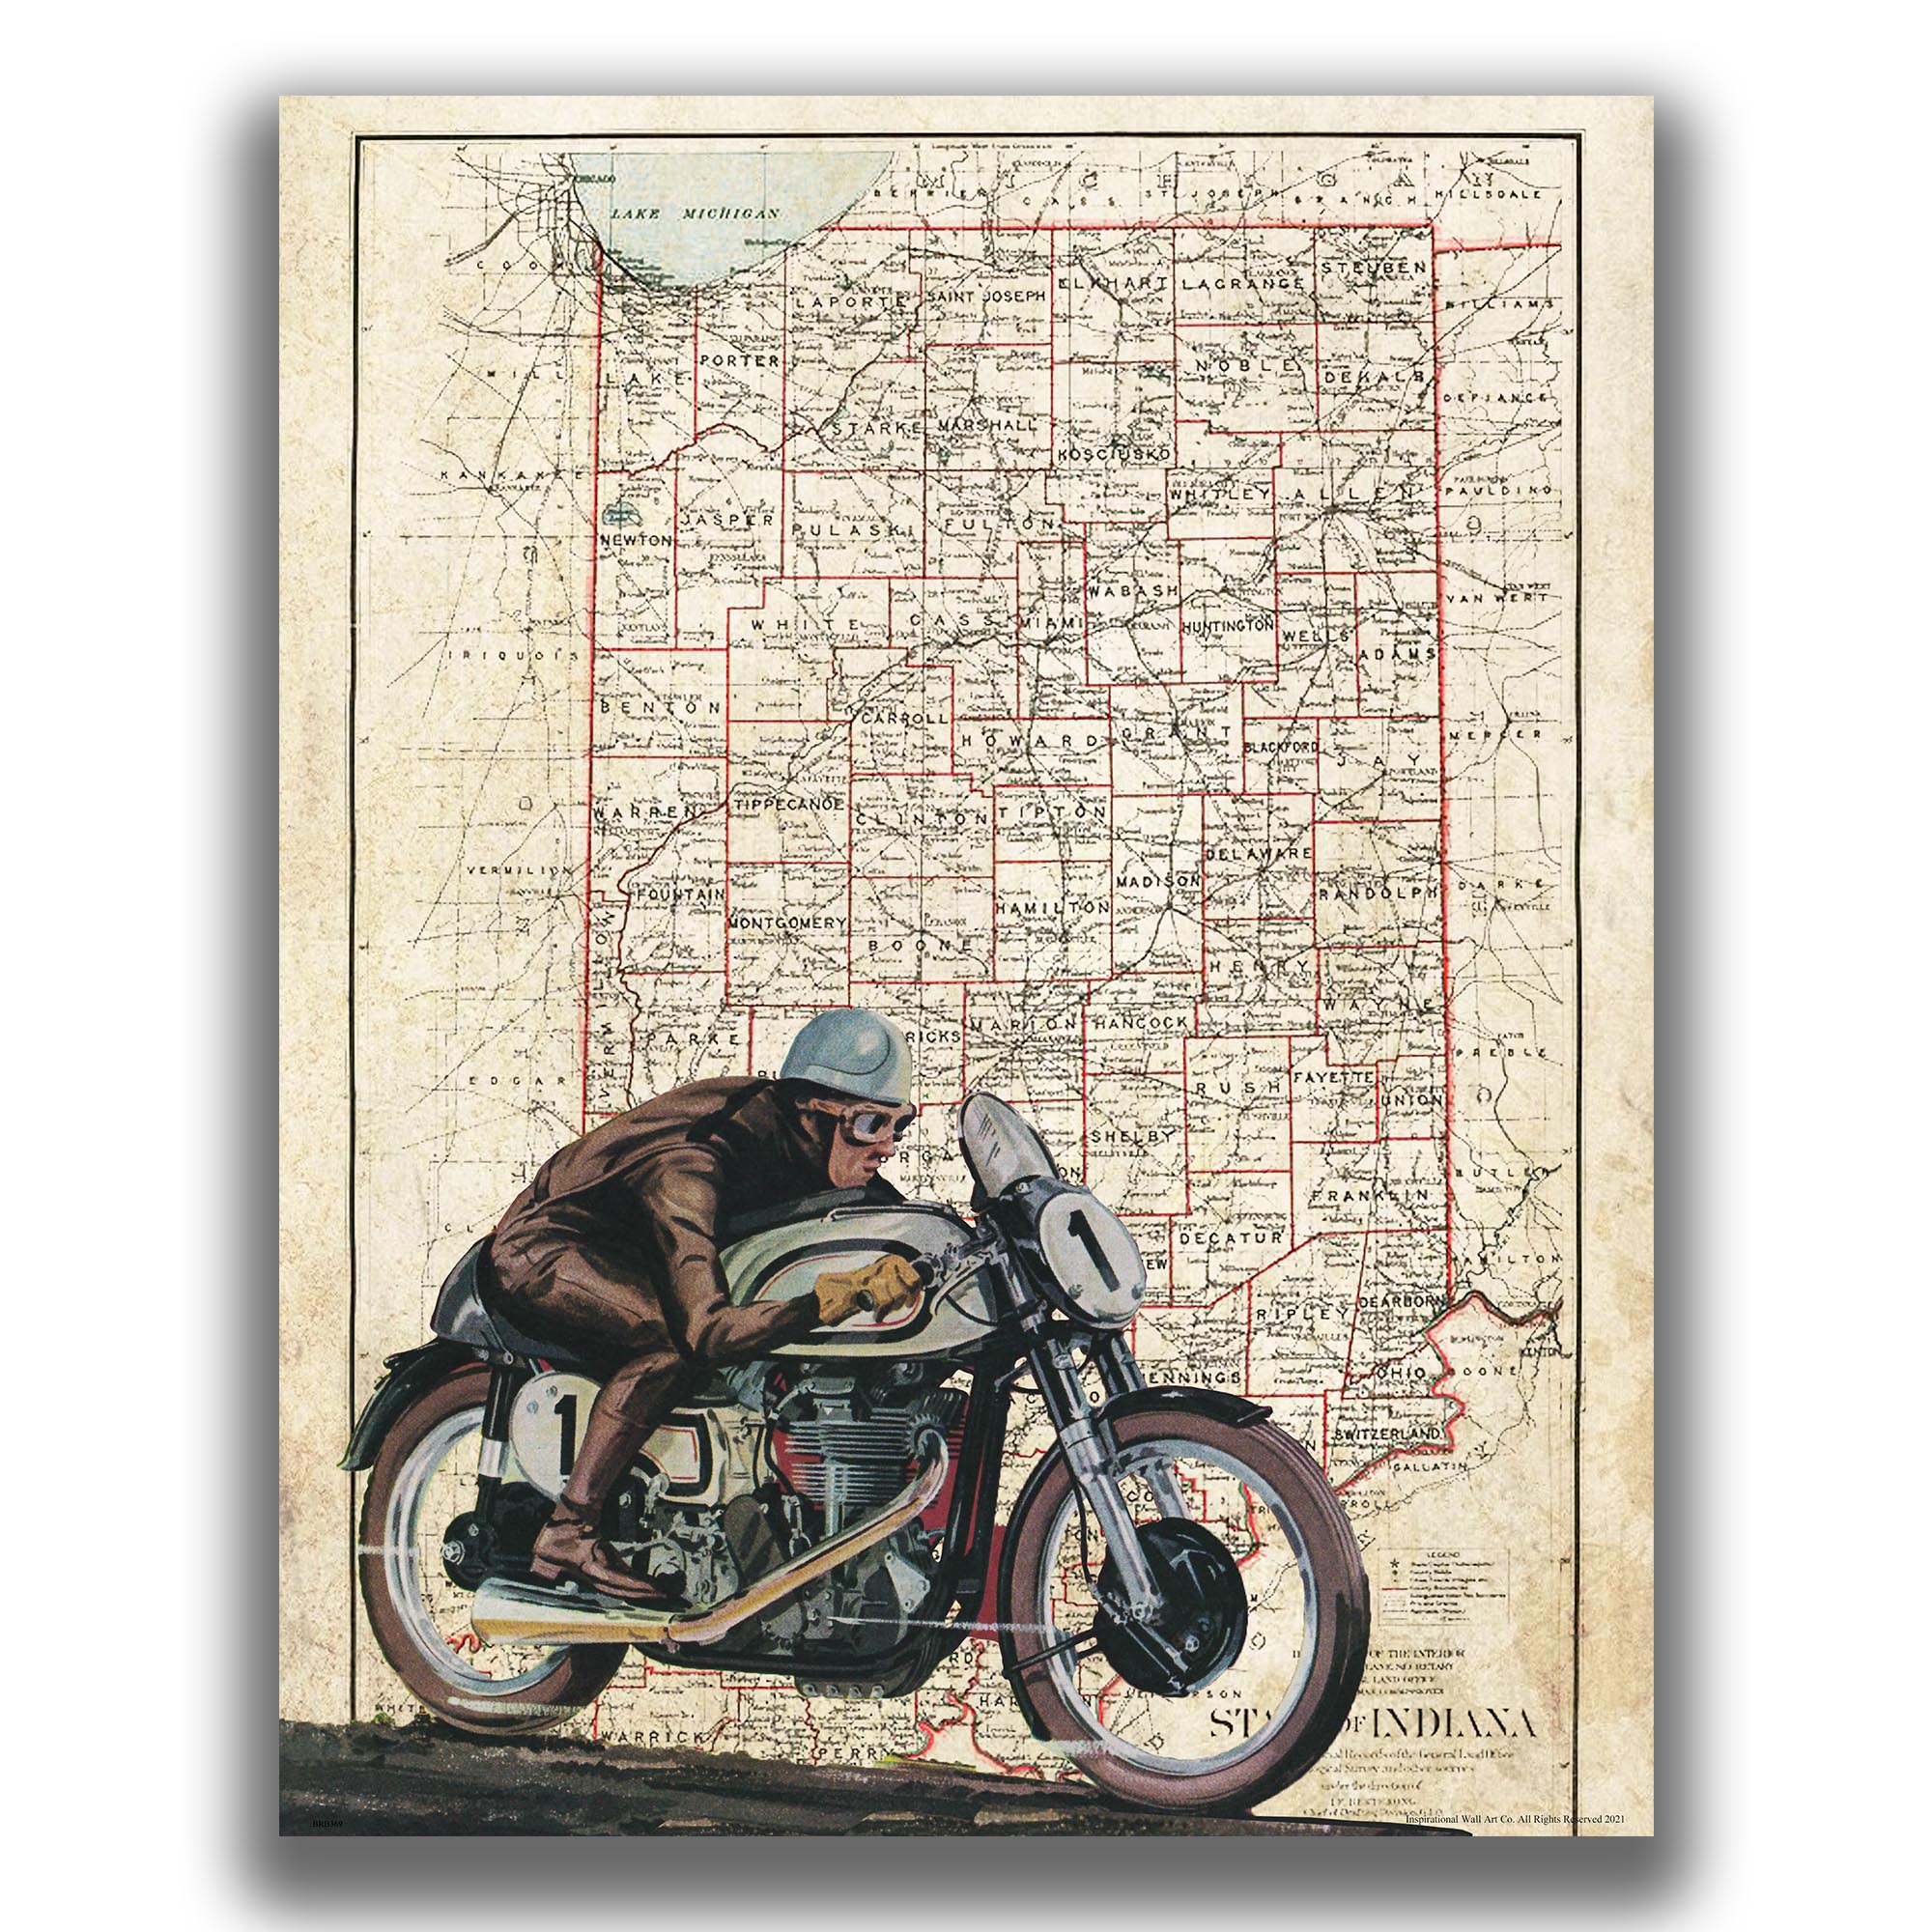 Indiana - Motorcycle Poster